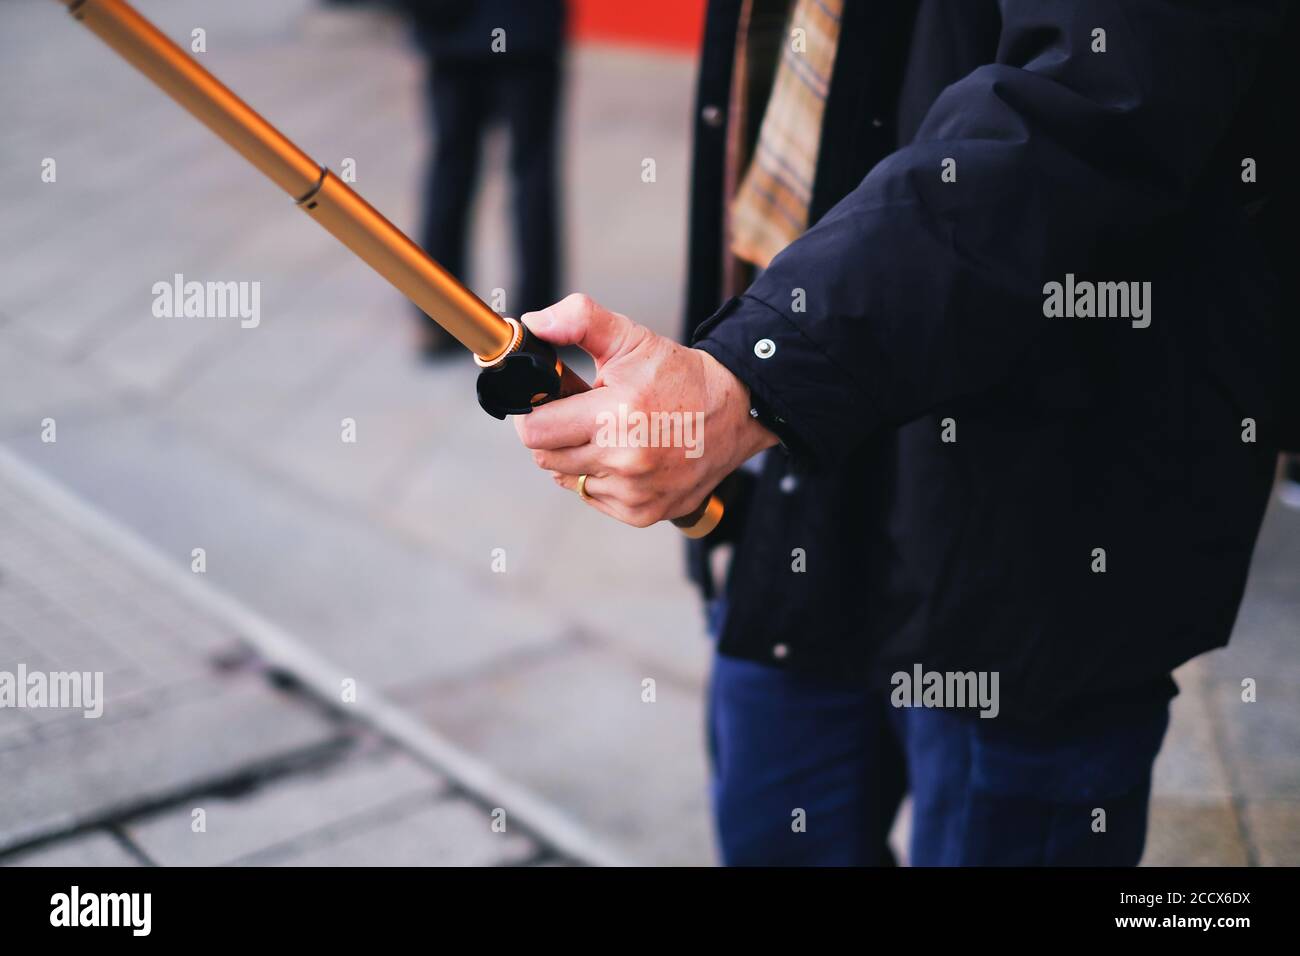 Man travel by alone and use a selfie stick for selfie himself Stock Photo